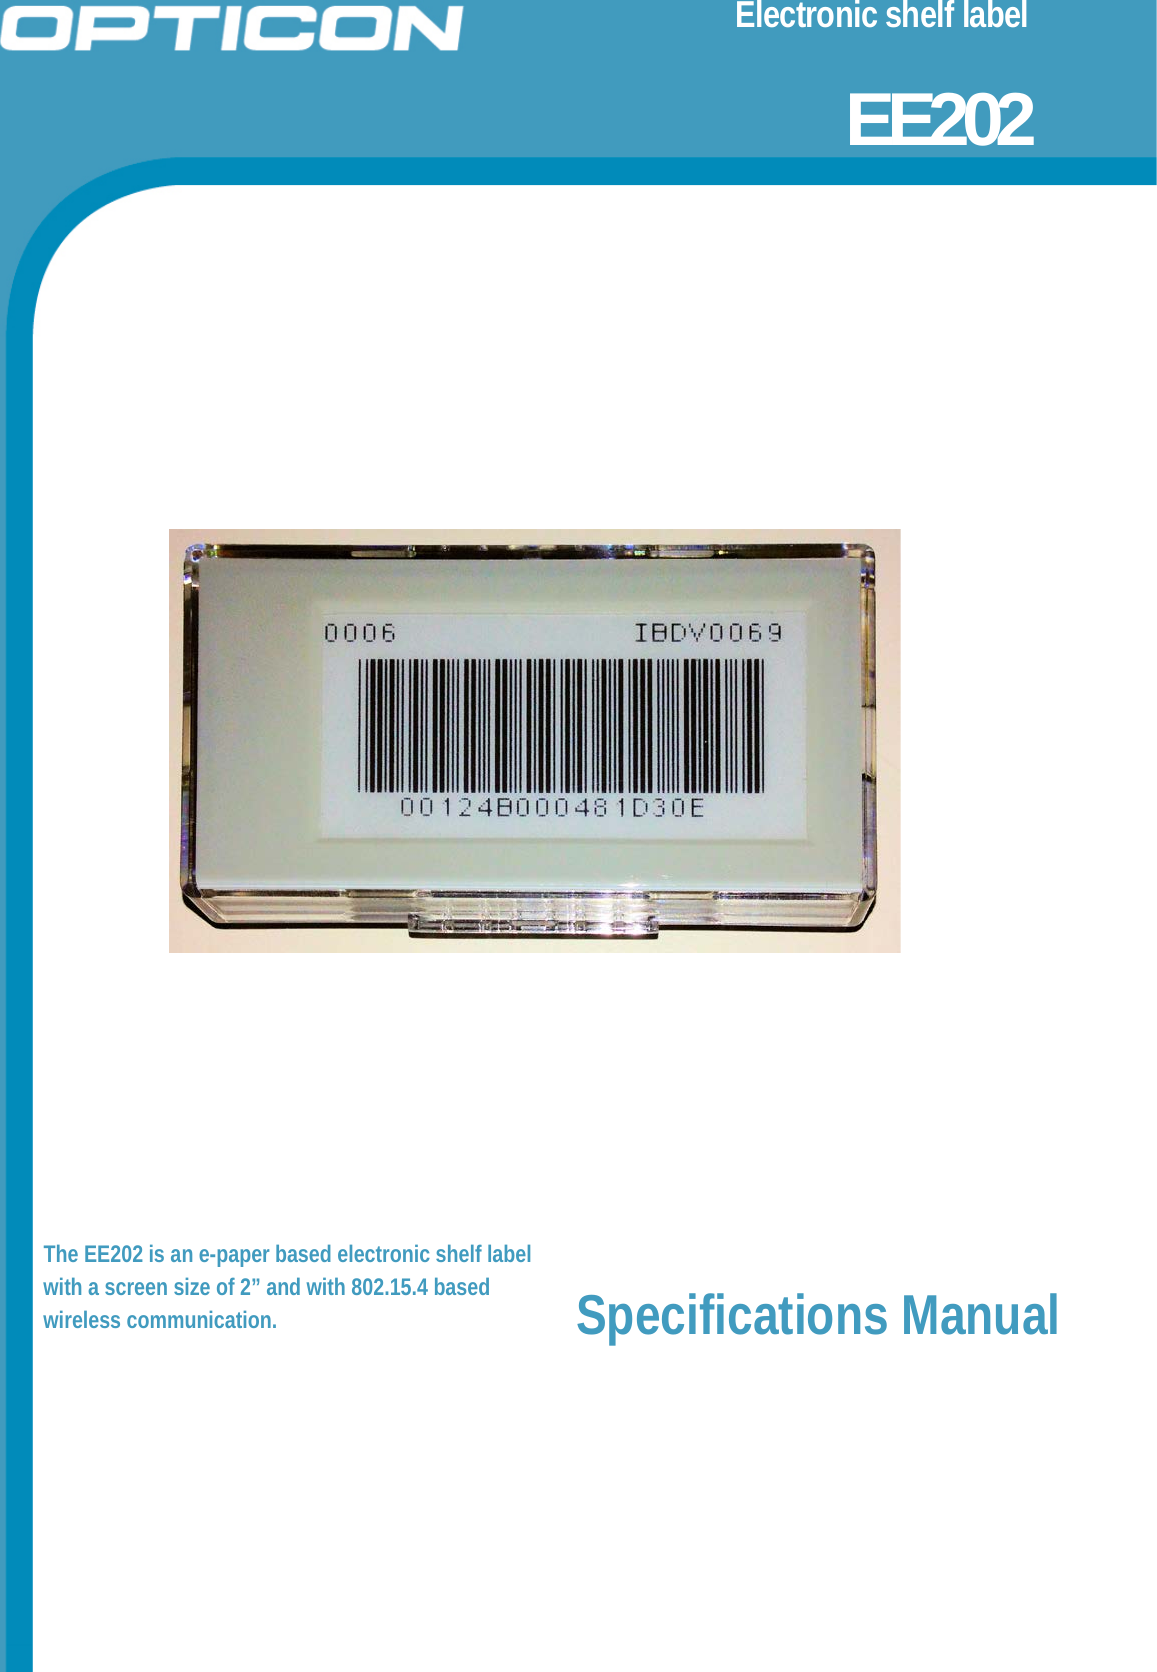 Electronic shelf label                        EE202                 The EE202 is an e-paper based electronic shelf label with a screen size of 2” and with 802.15.4 based wireless communication.  Specifications Manual   